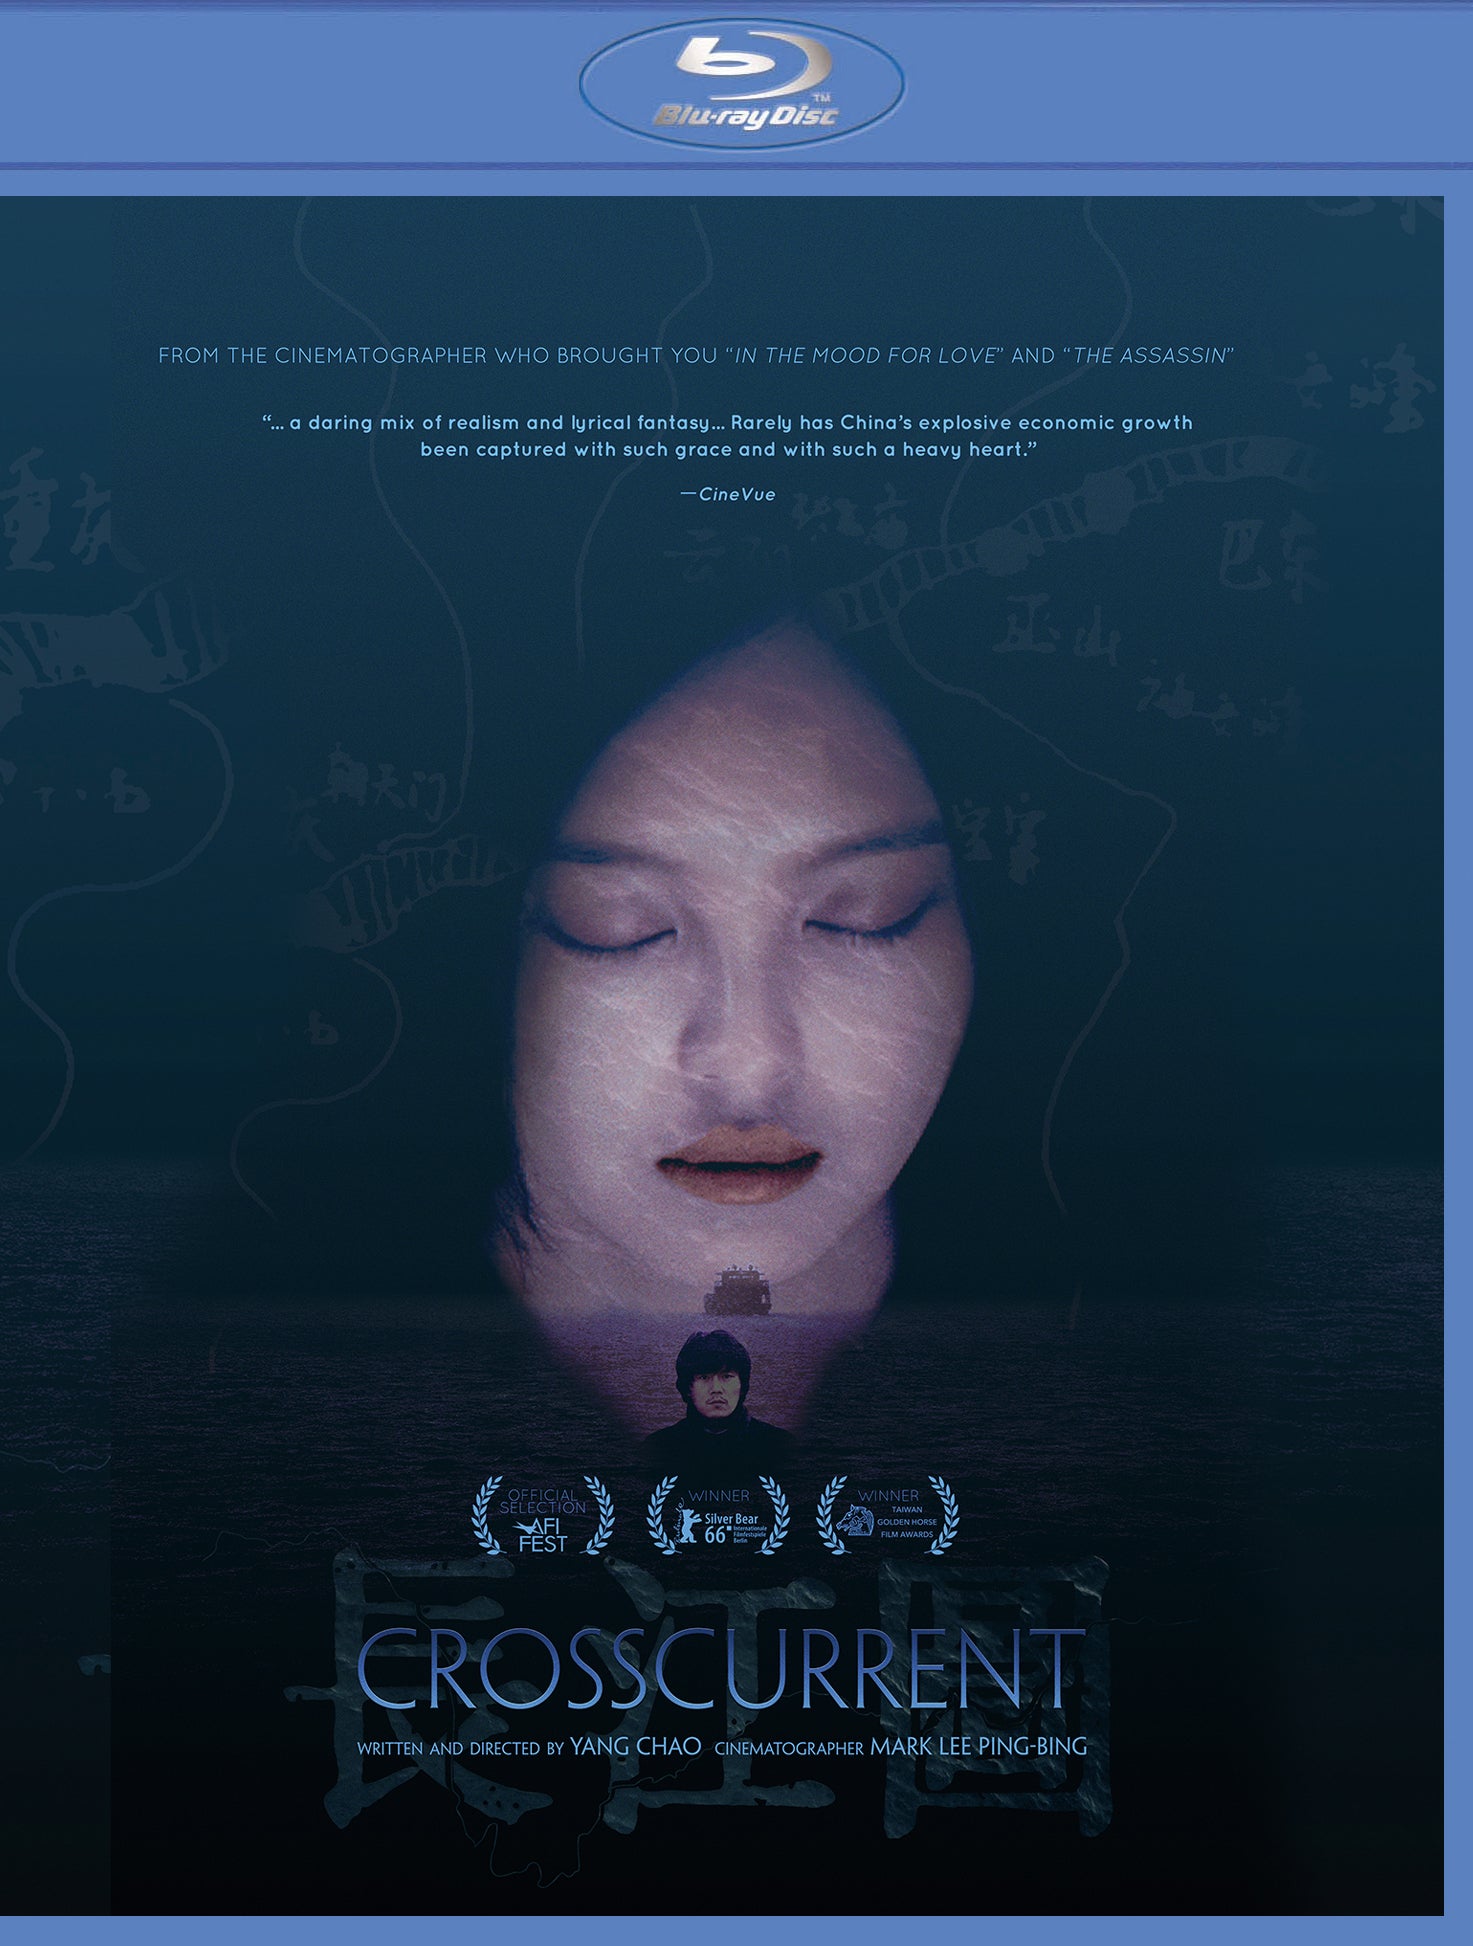 Crosscurrent [Blu-ray] cover art